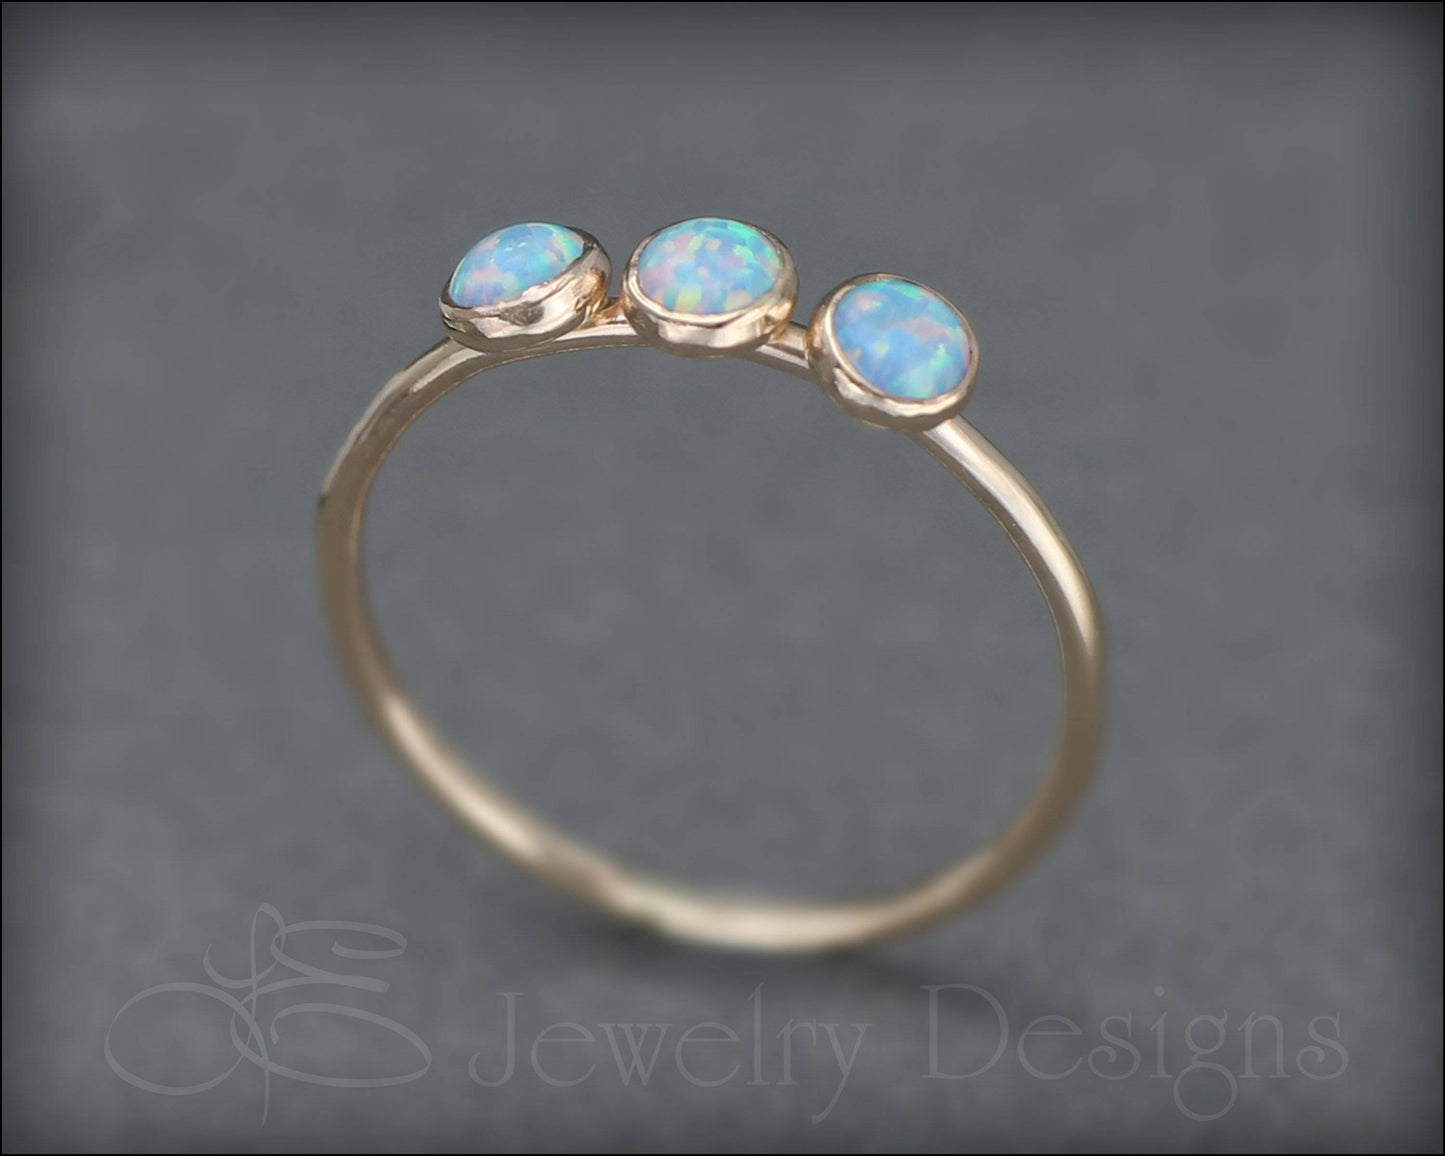 3-Stone Gold-Filled Opal Ring - LE Jewelry Designs